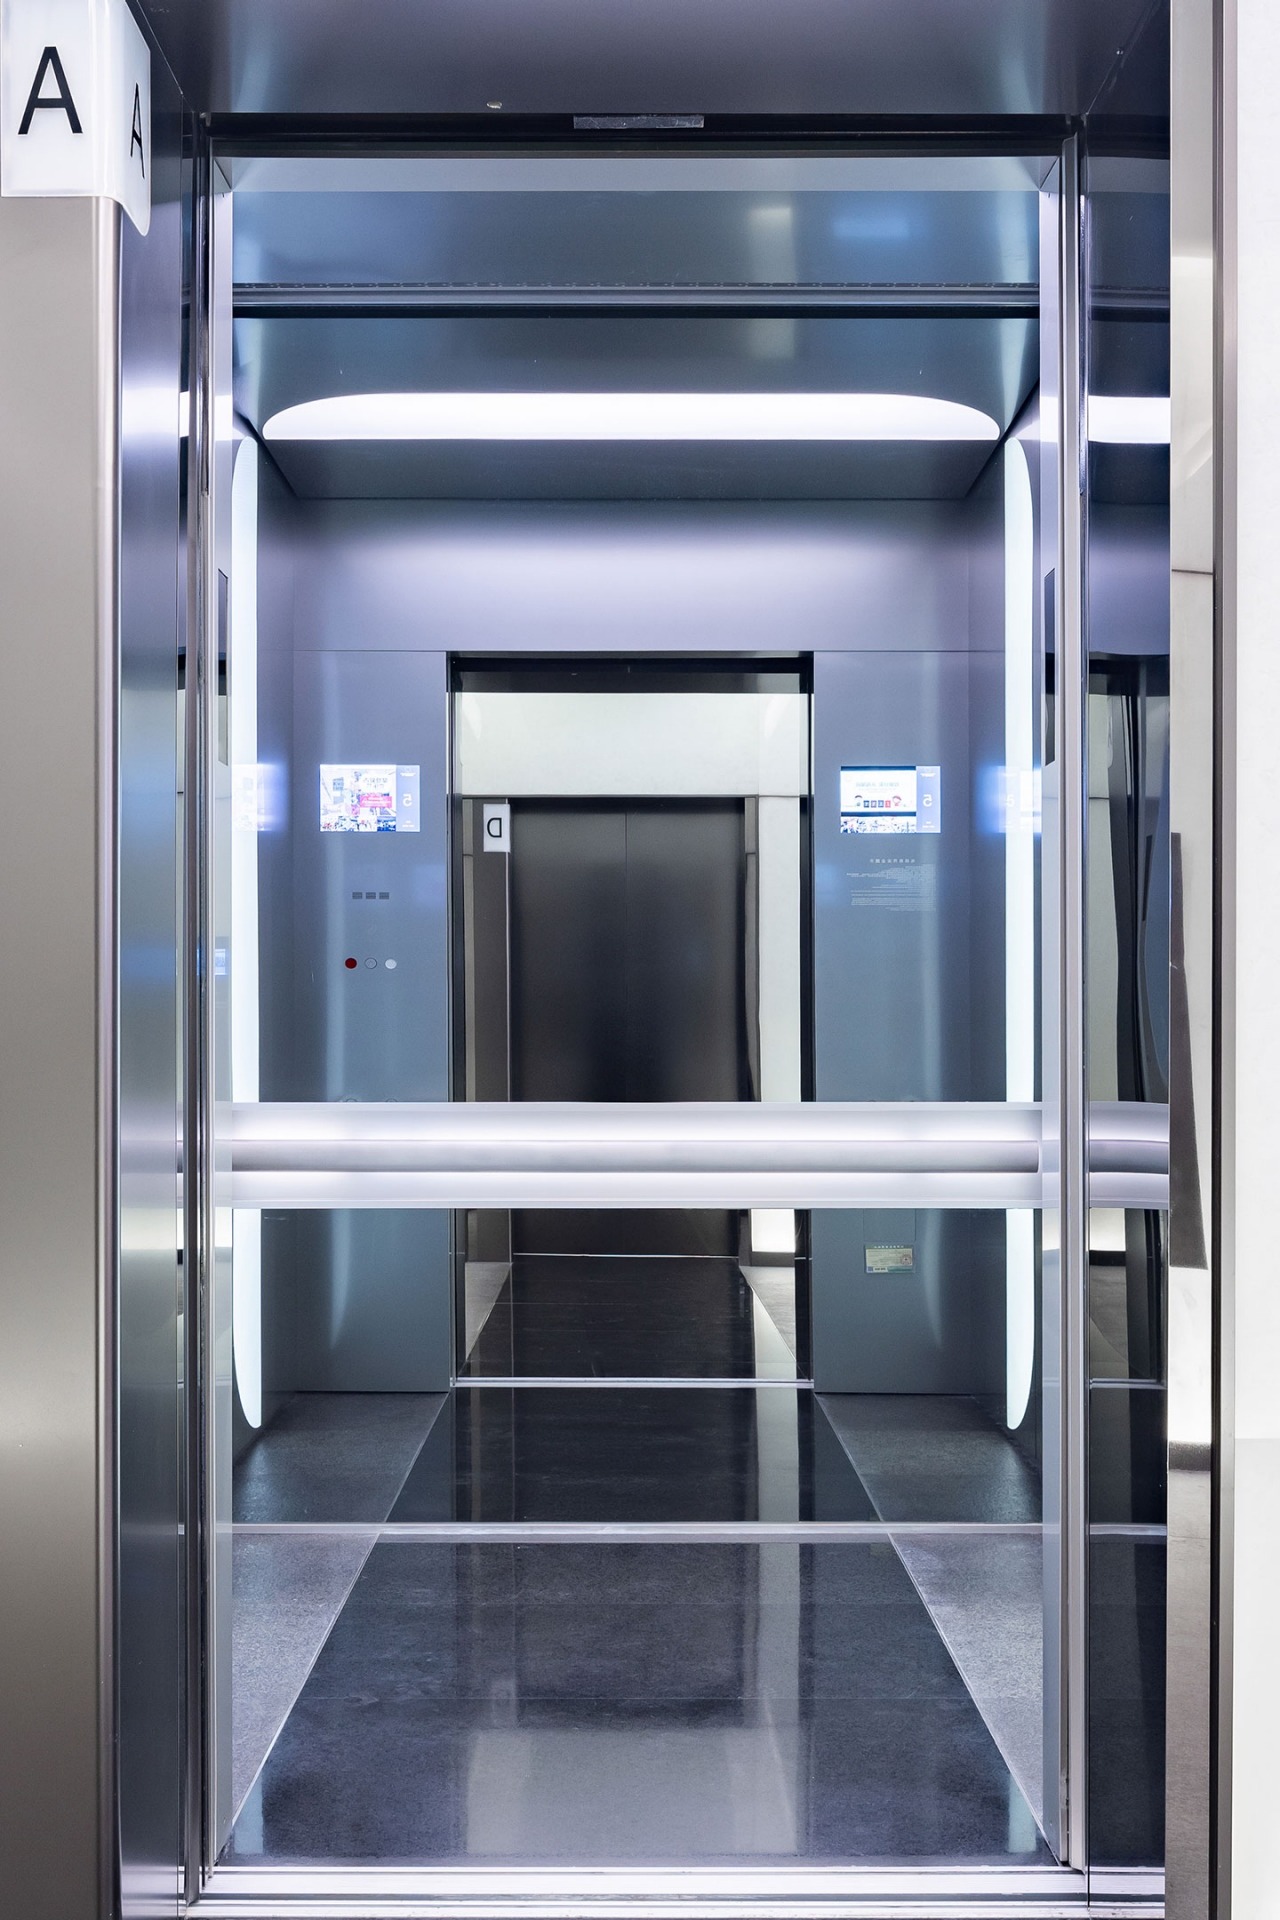 what are the advantages of hydraulic elevator?